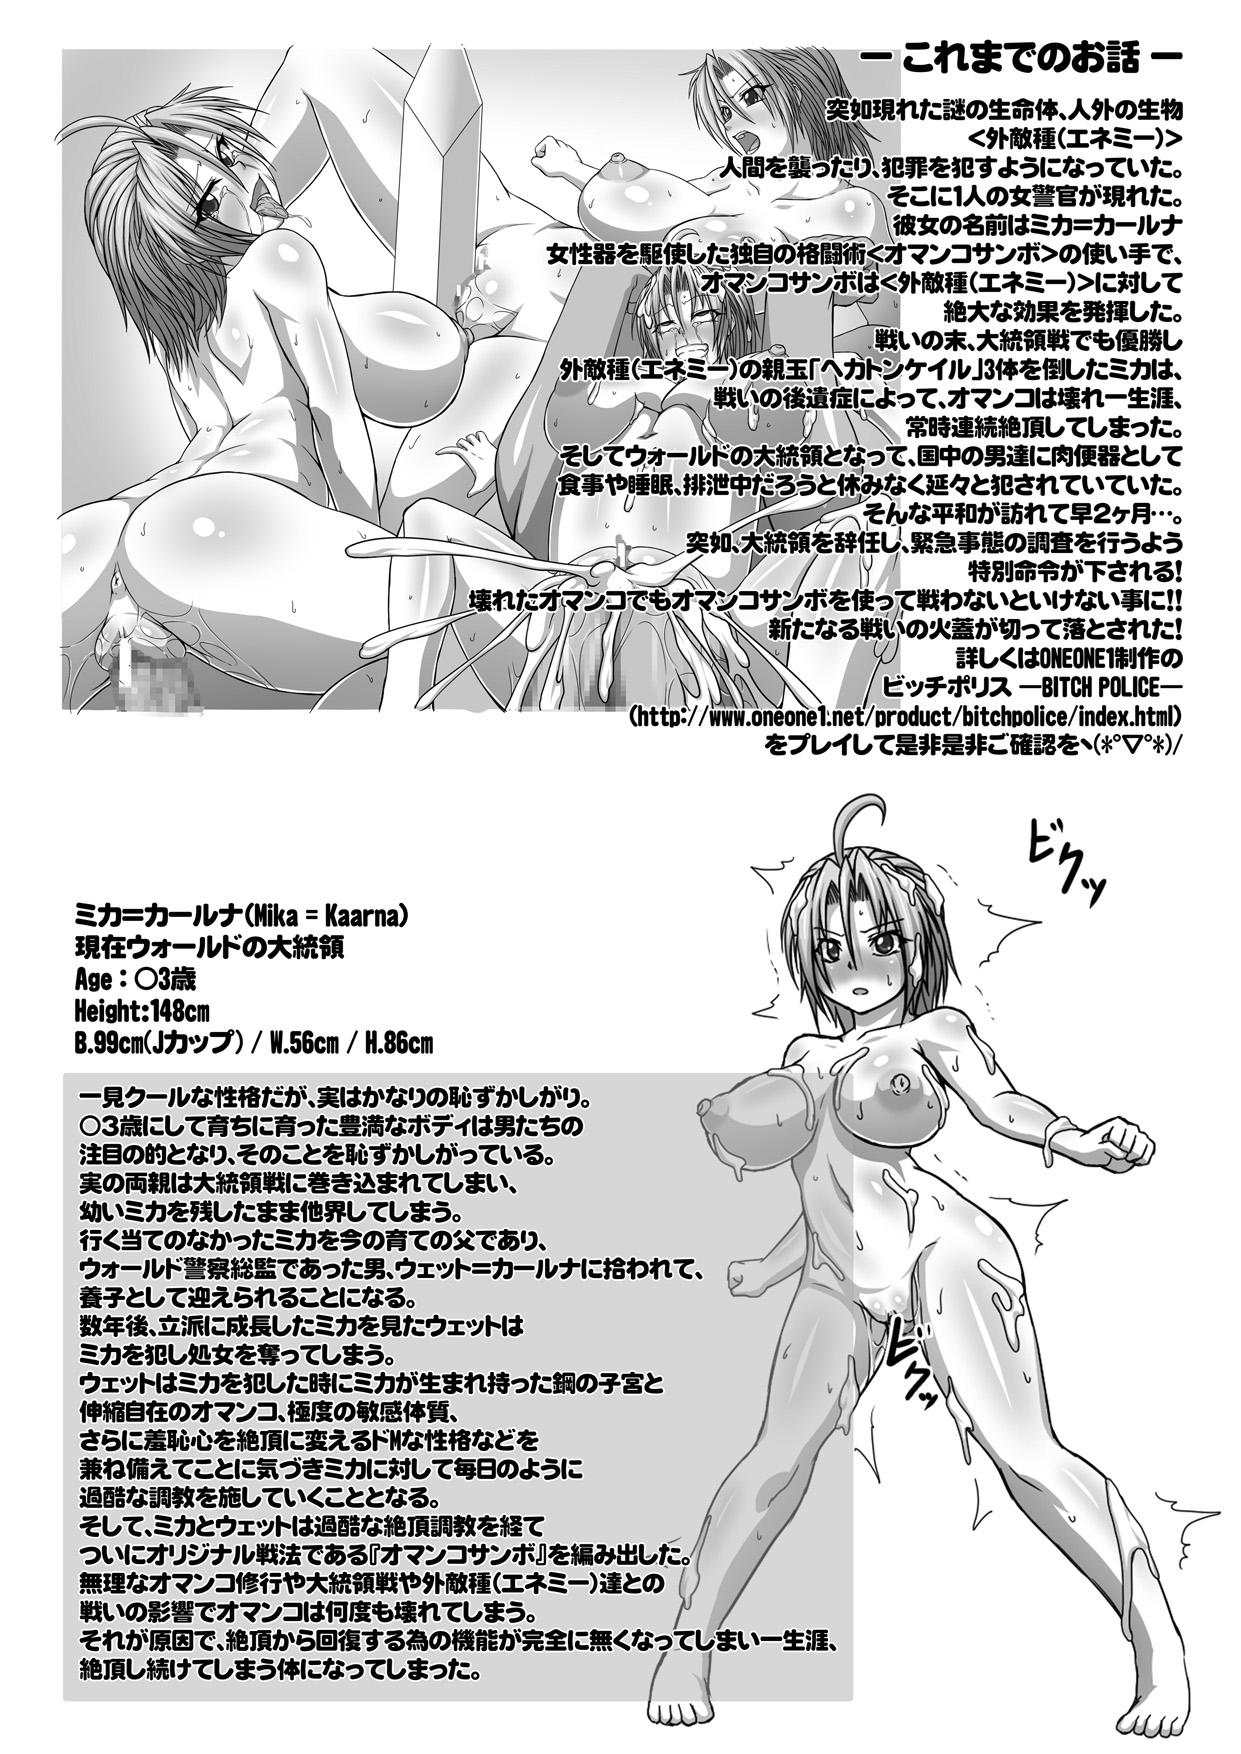 Assfingering [ONEONE1 (Pepo)] Bitch Police R -BITCH POLICE RETURNS- vol.1 [Digital] Tan - Page 4